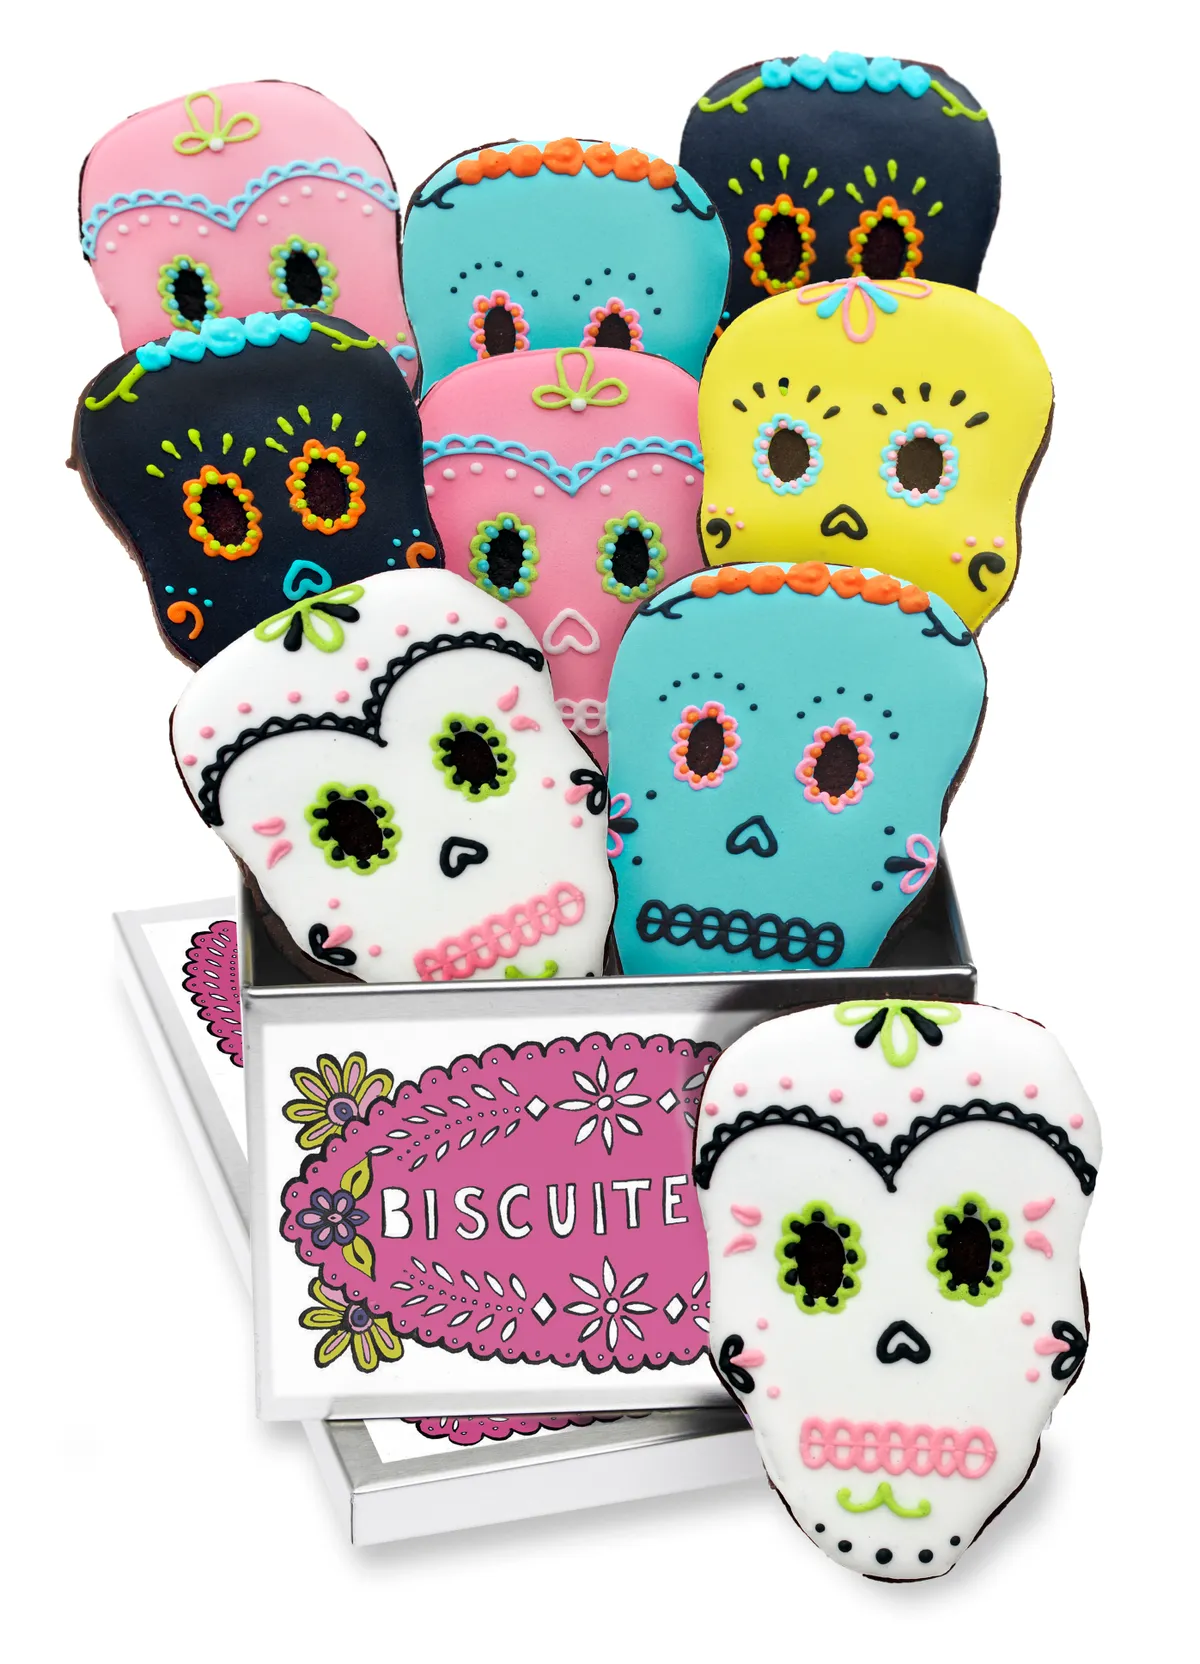 Biscuiteers day of the dad colourful skull shaped biscuits displayed around a tin